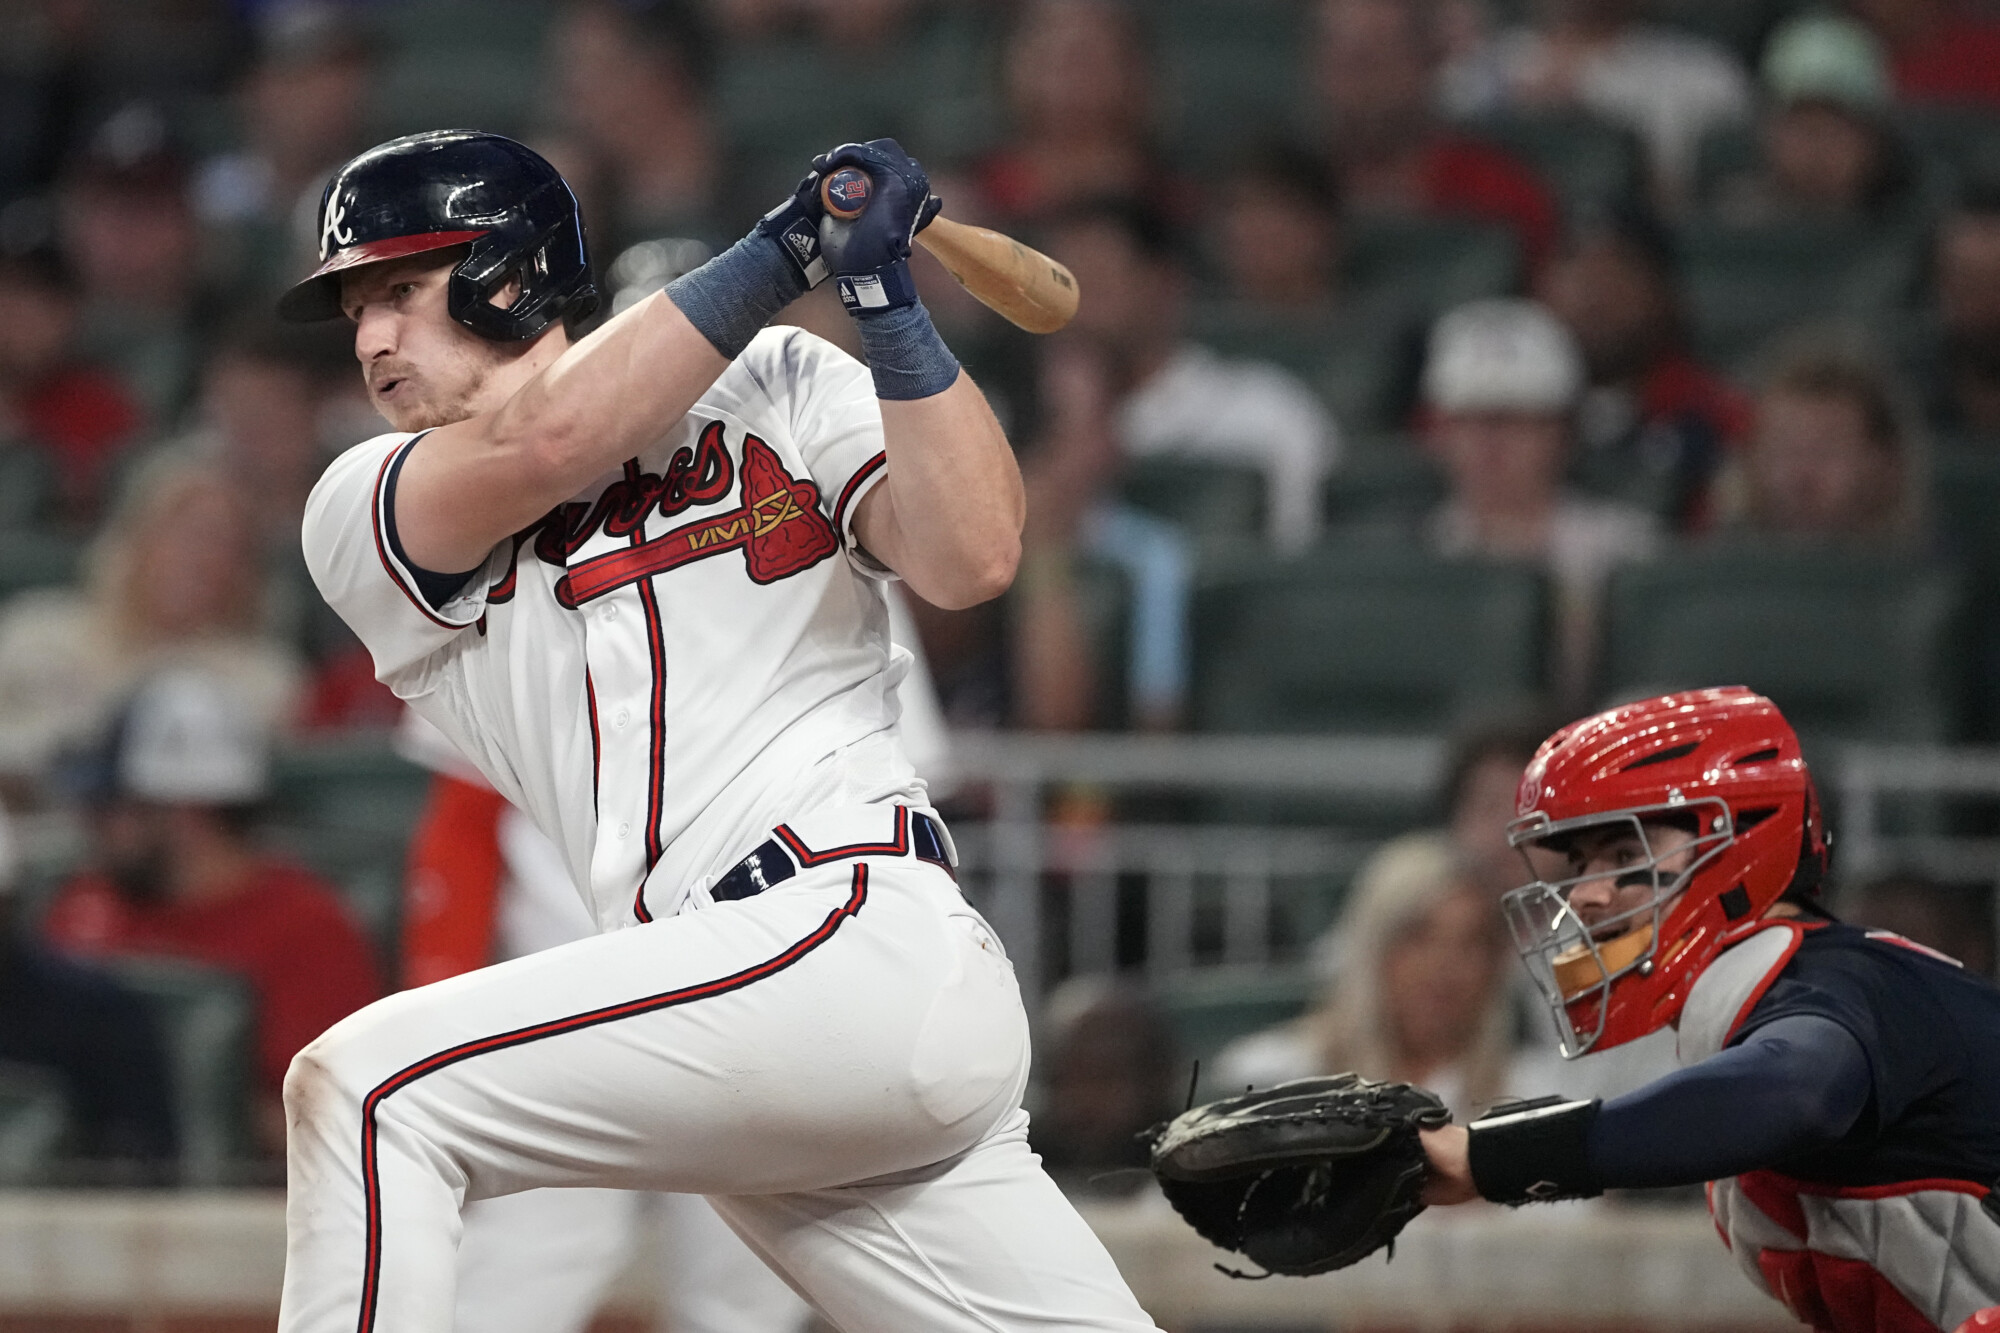 Olson's 2-run HR in 1st helps Braves overpower Red Sox 9-3